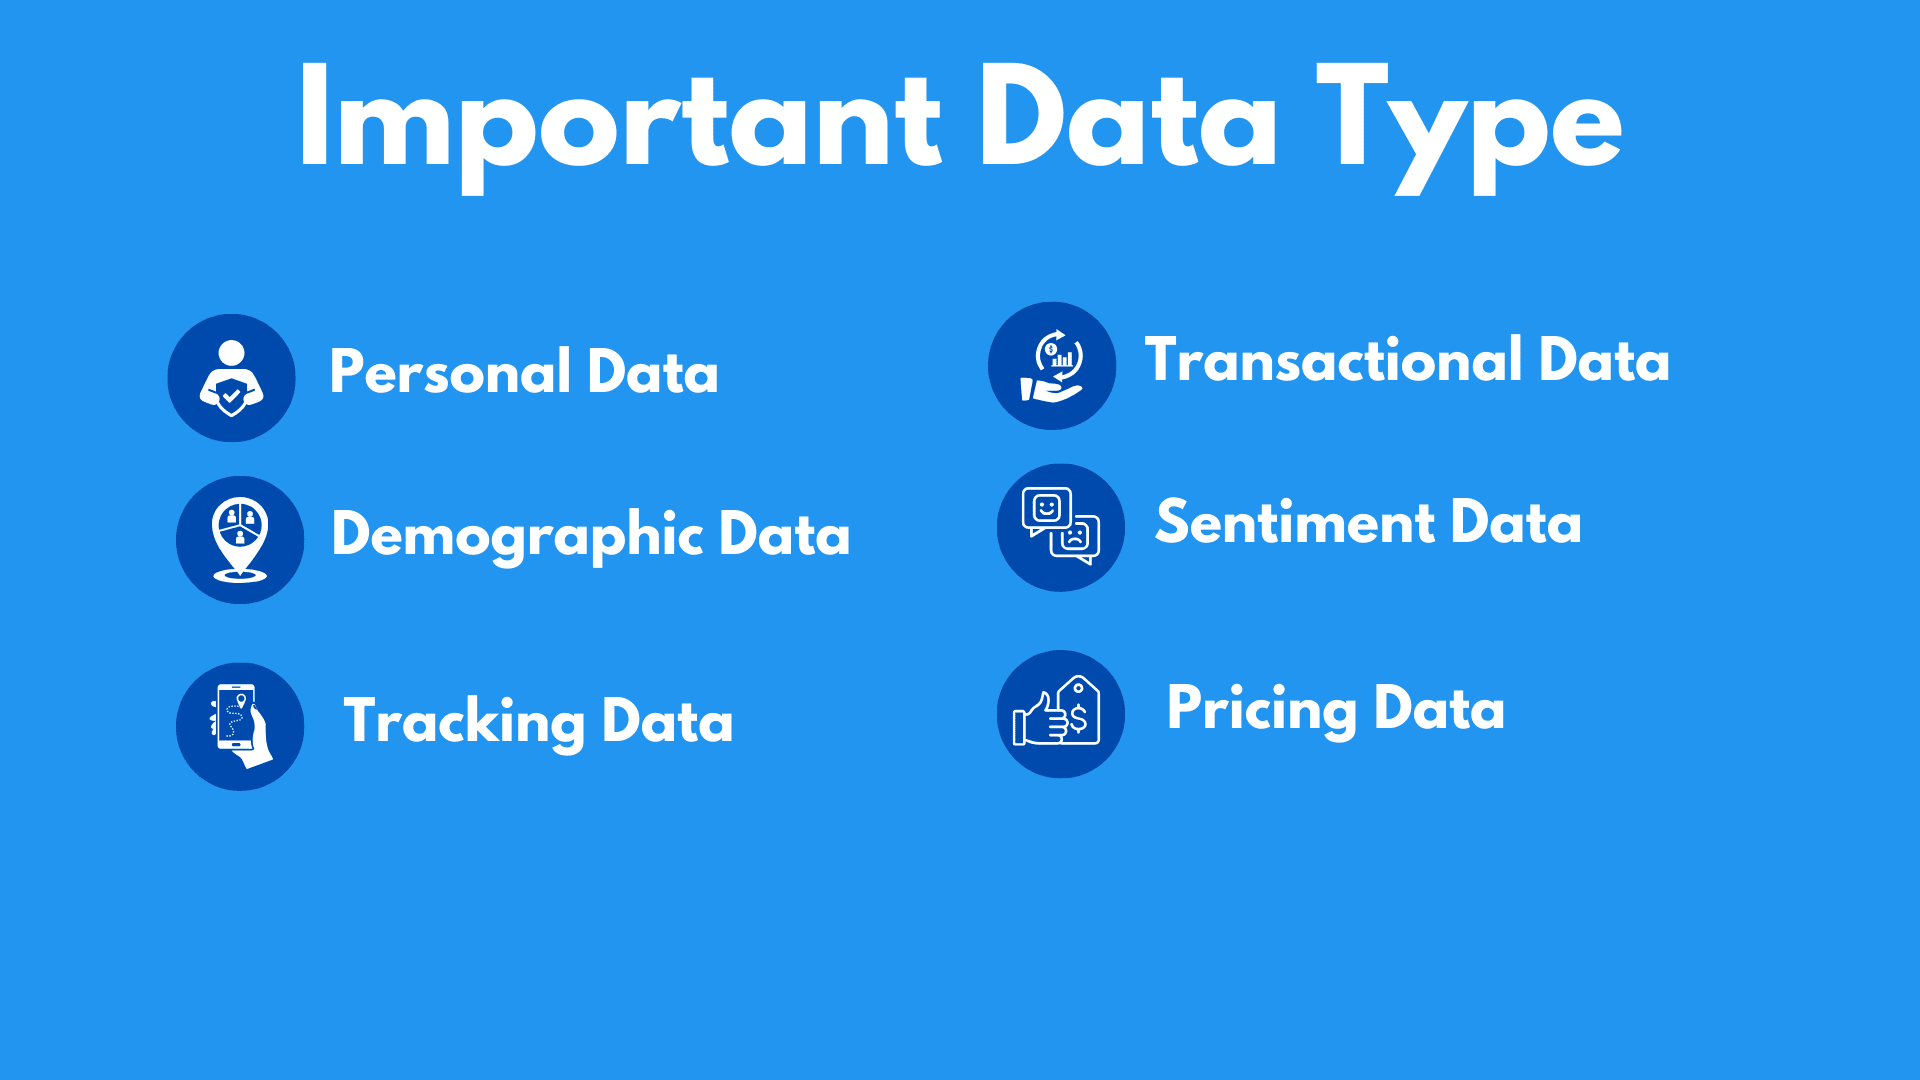 The Most Important Data Types and Their Uses